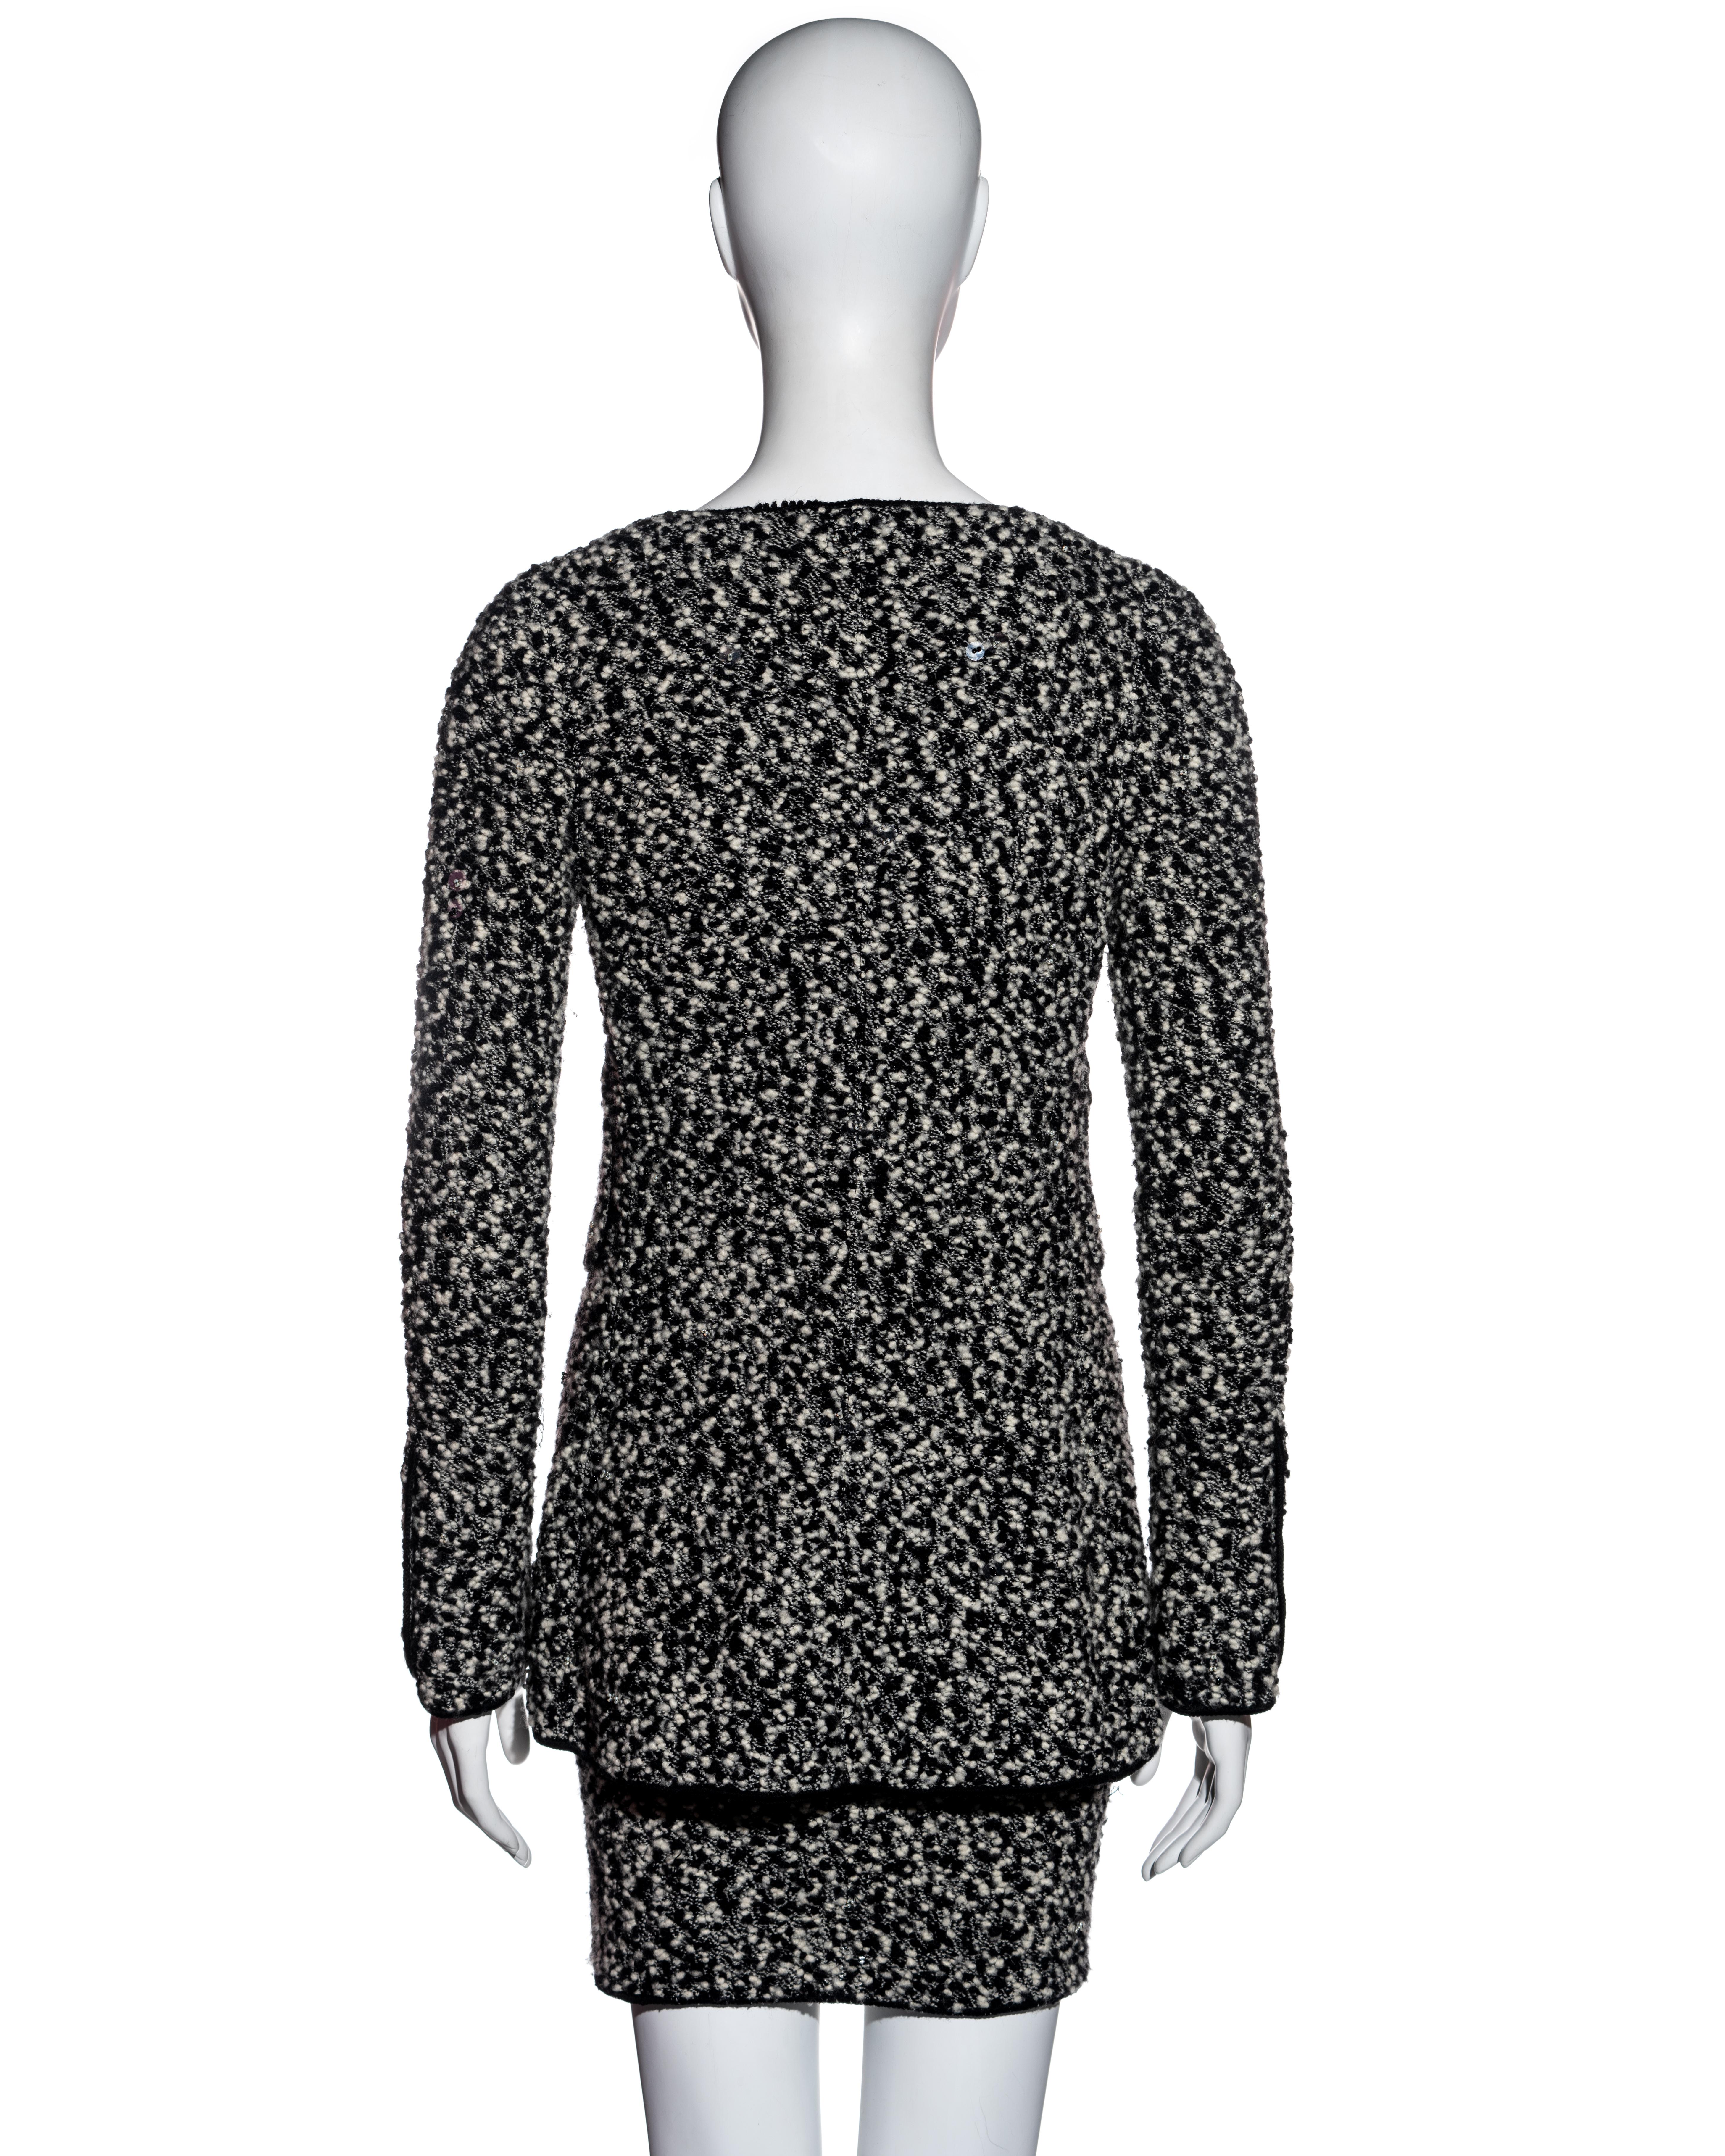 Chanel by Karl Lagerfeld bouclé wool mini dress and cardigan set, fw 1994 For Sale 6